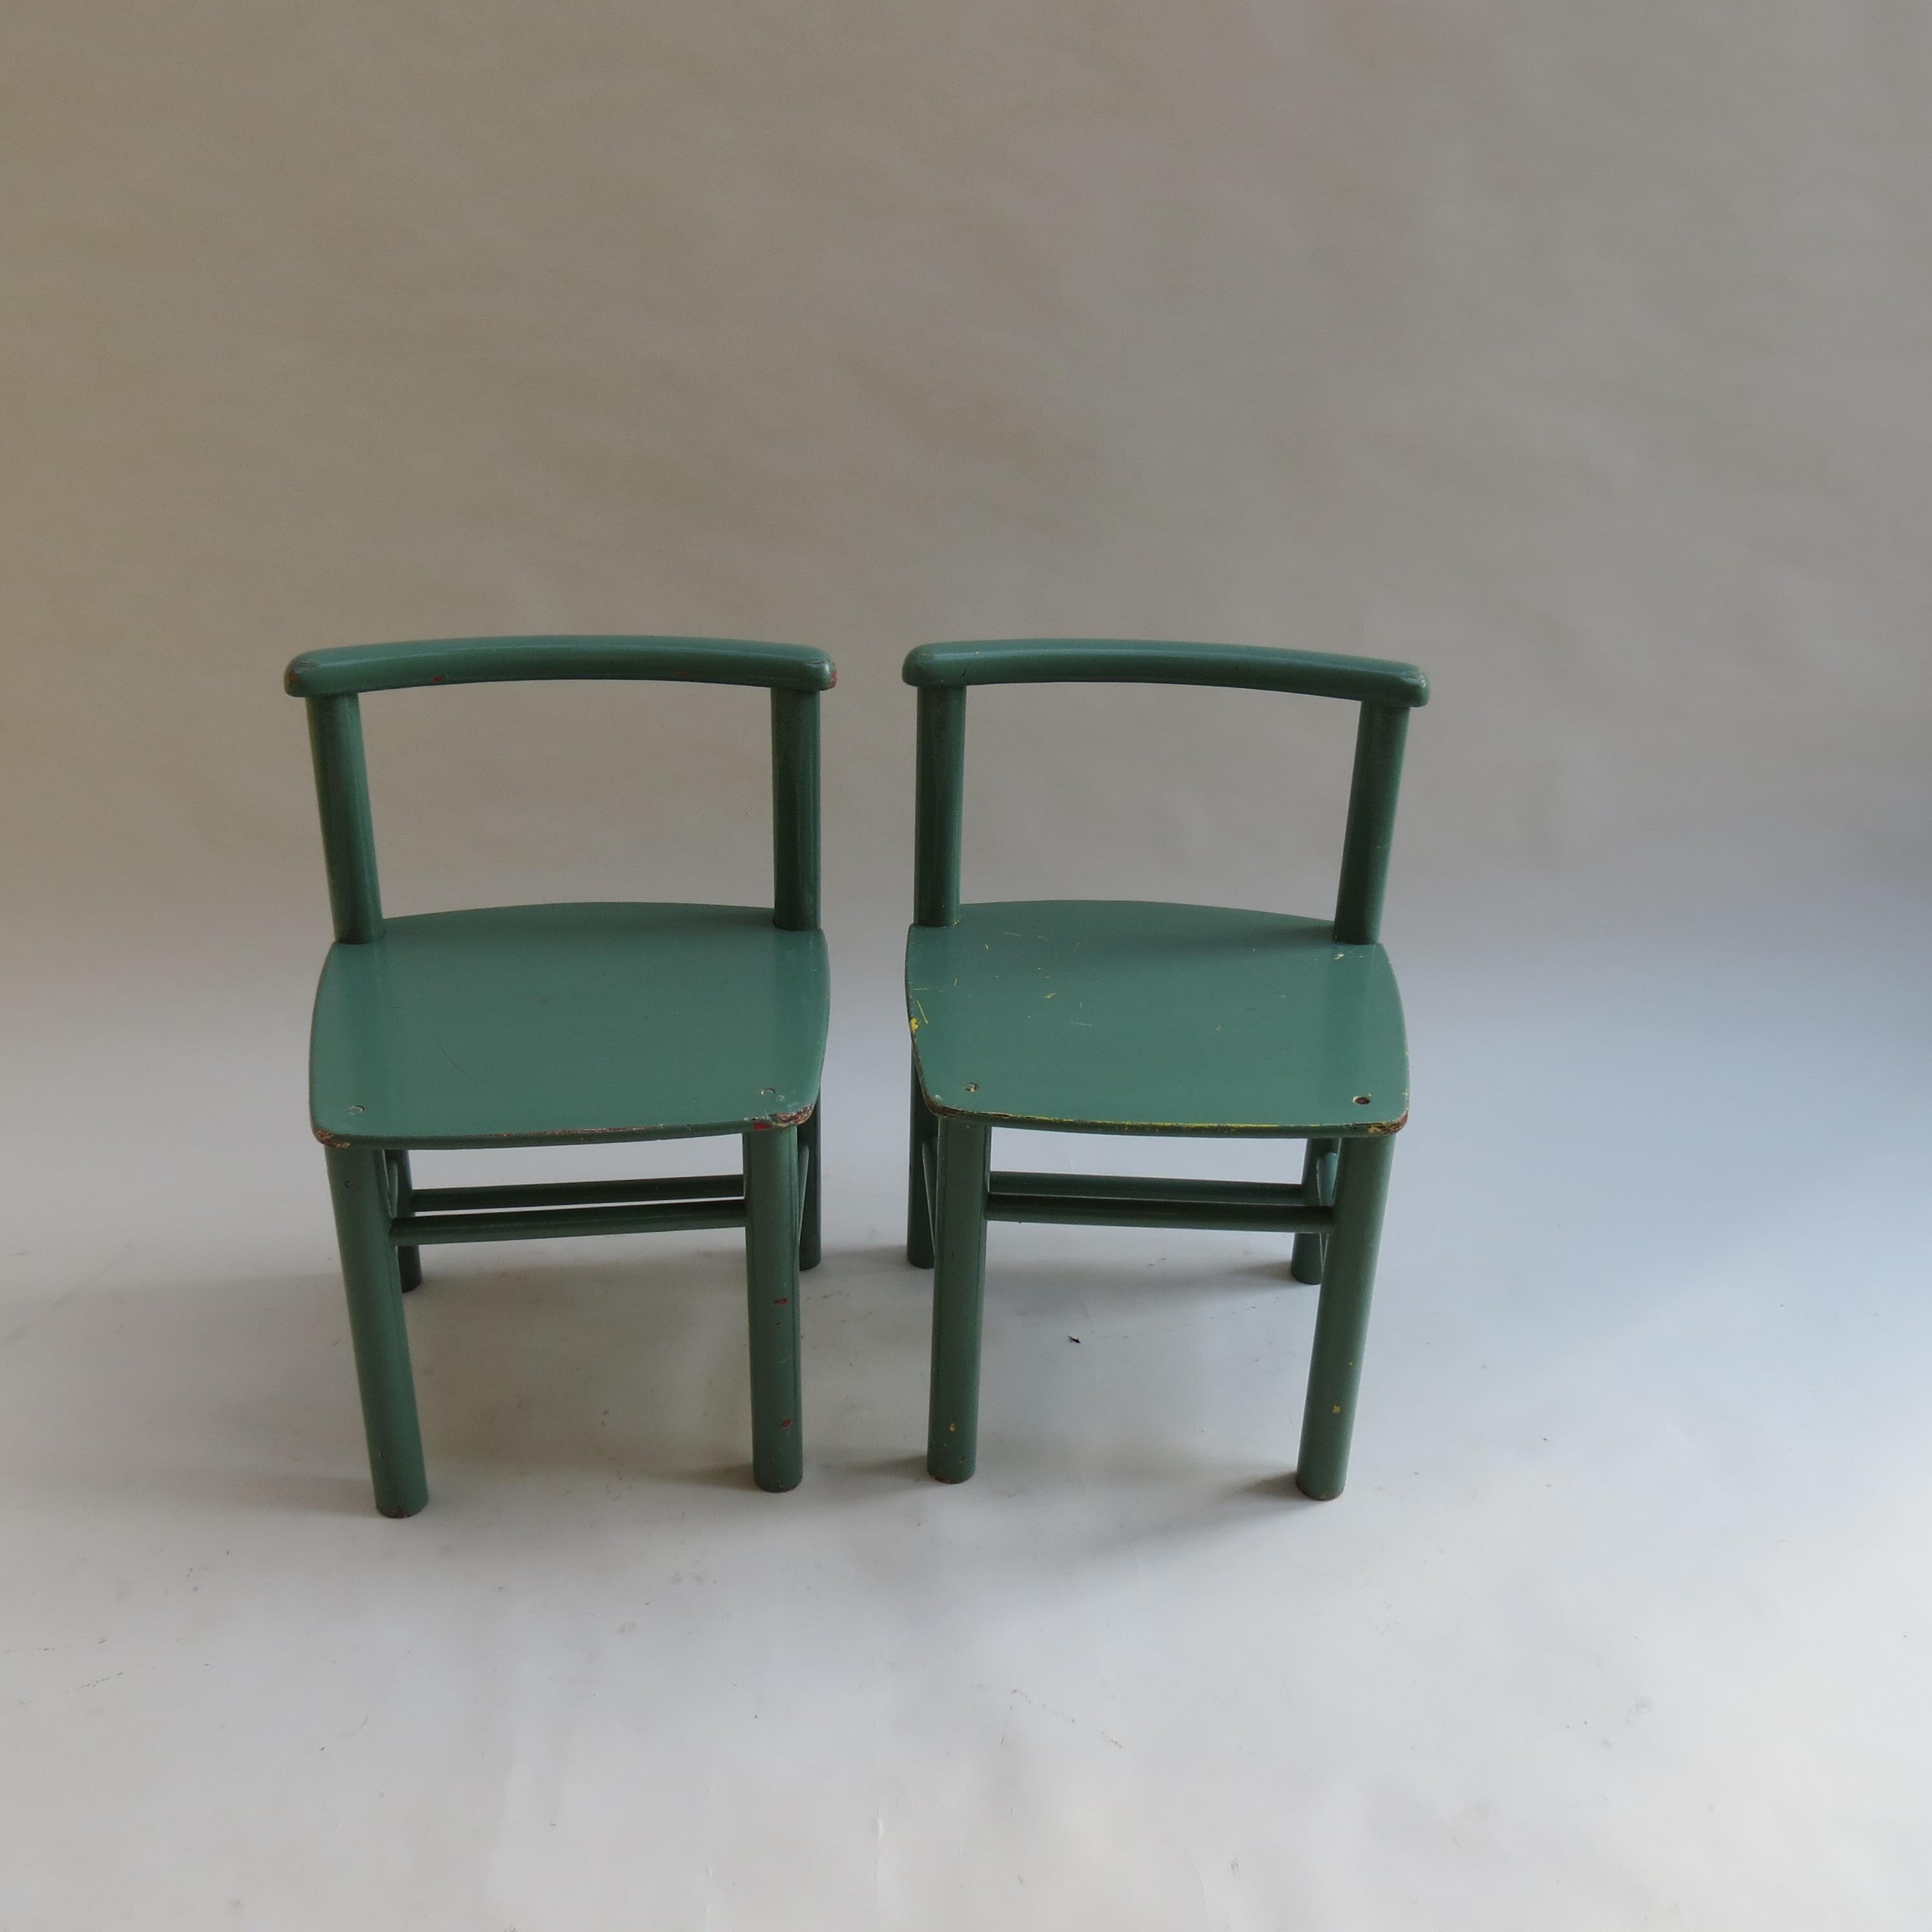 Mid-Century Modern Pair of Scandinavian Childs Chairs in Green from the 1960s